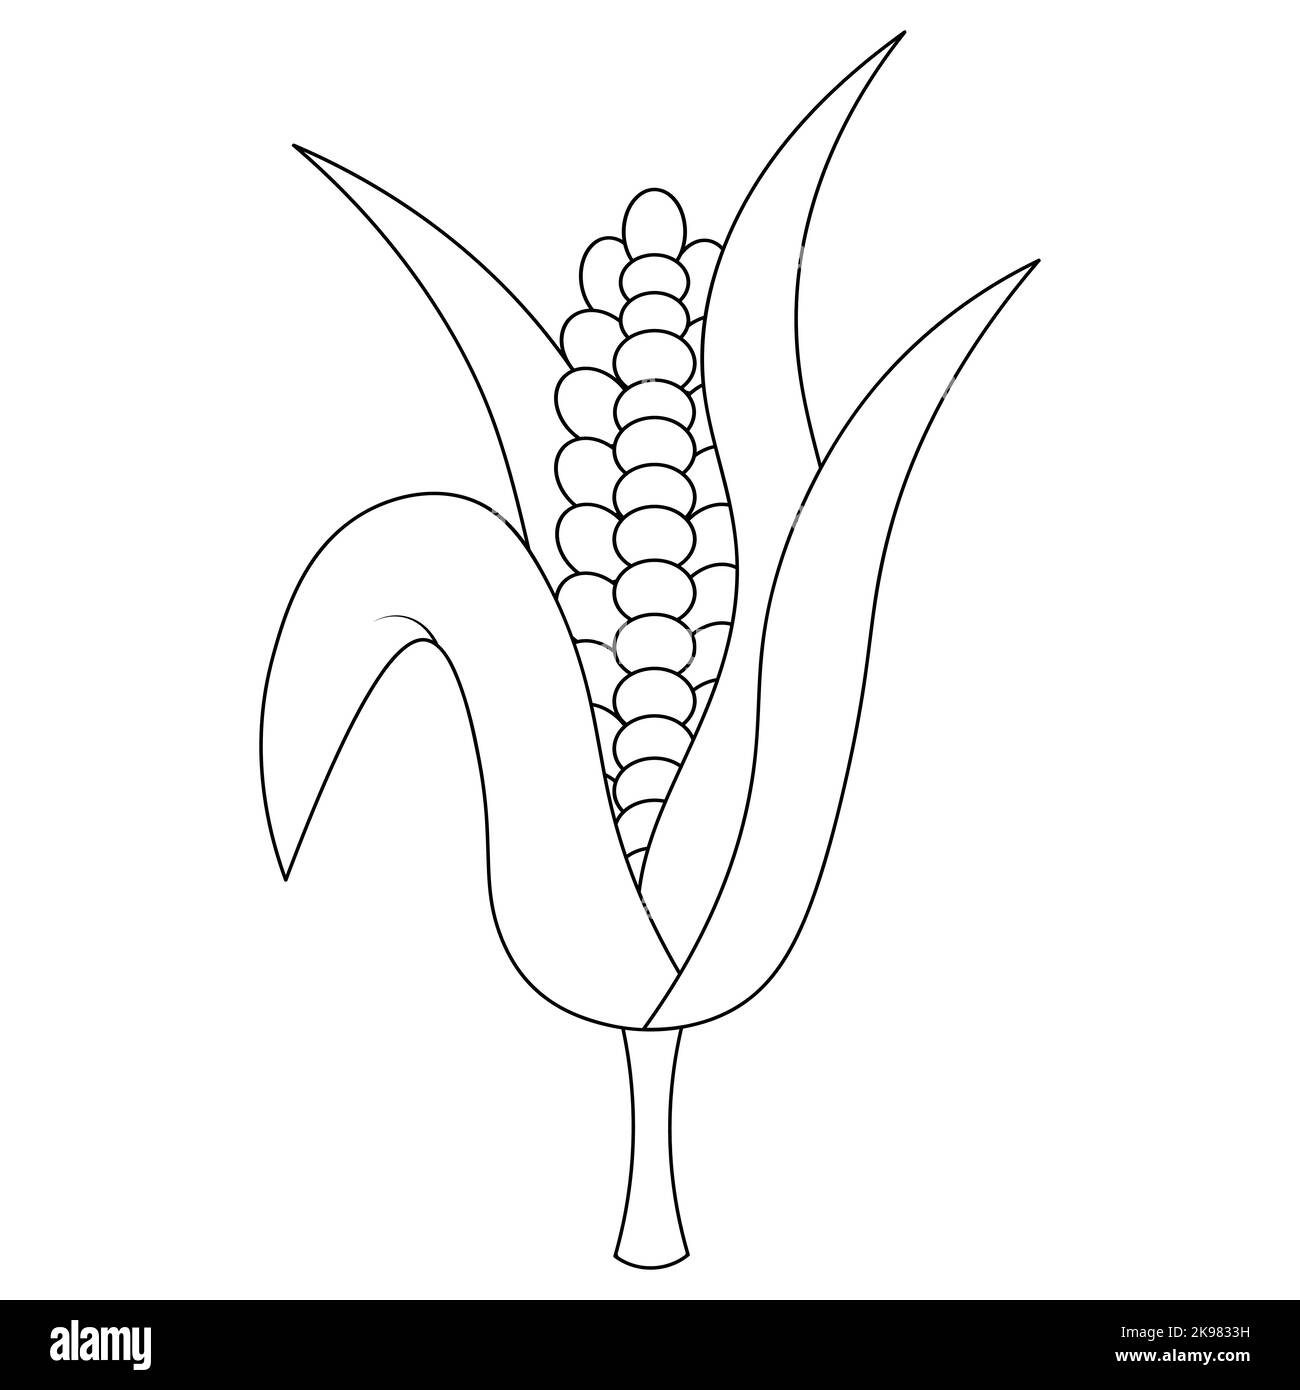 Corn. An ear of corn is wrapped in leaves. Vector illustration. Outline on an isolated white background. Doodle style. Sketch. Juicy grains. Stock Vector